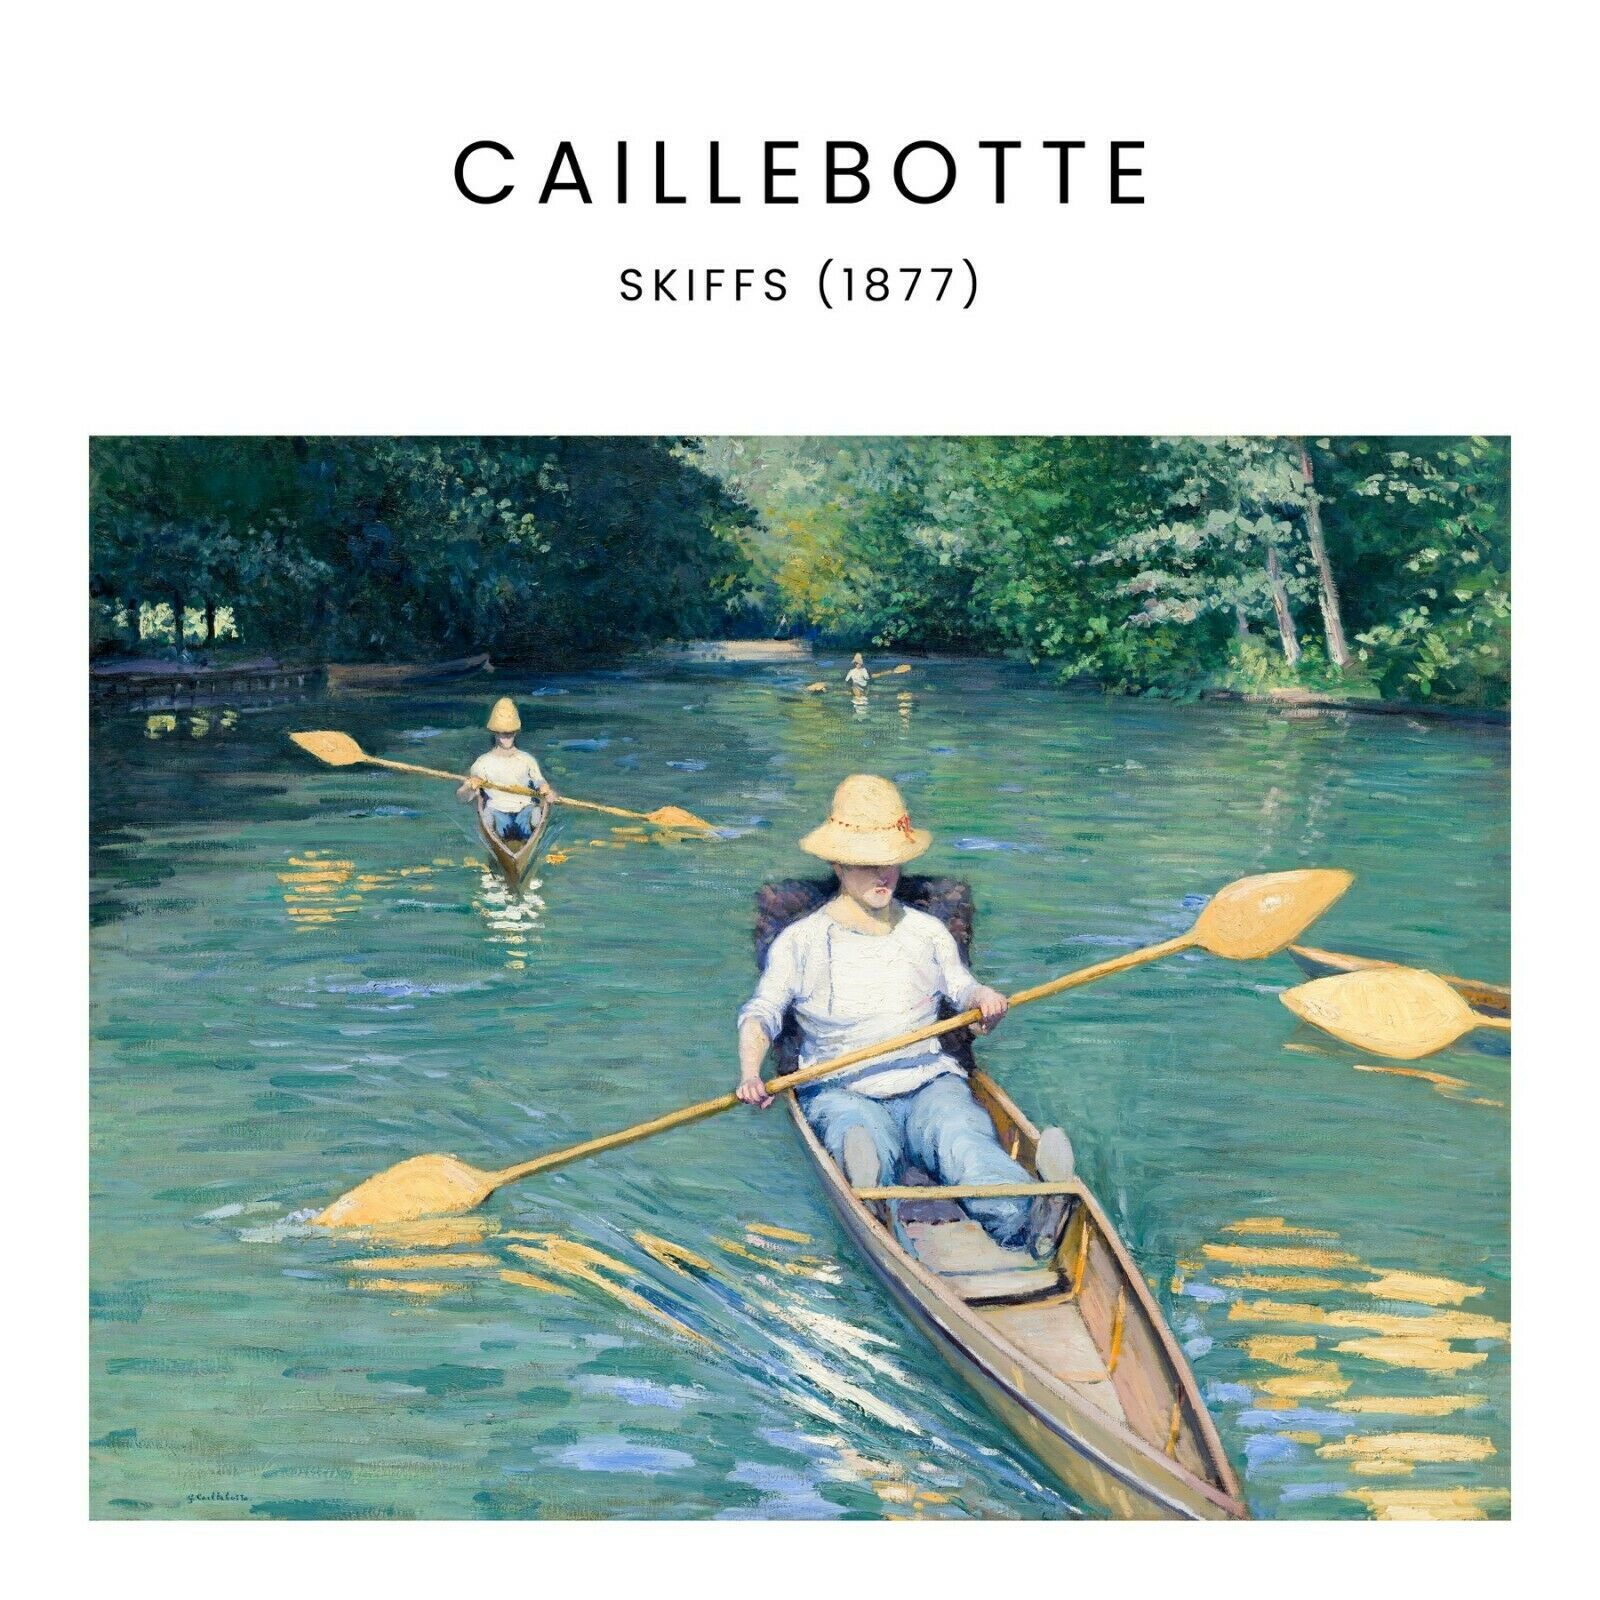 12413.Decoration Poster.Home wall art design.Caillebotte painting.Skiffs.Rowing